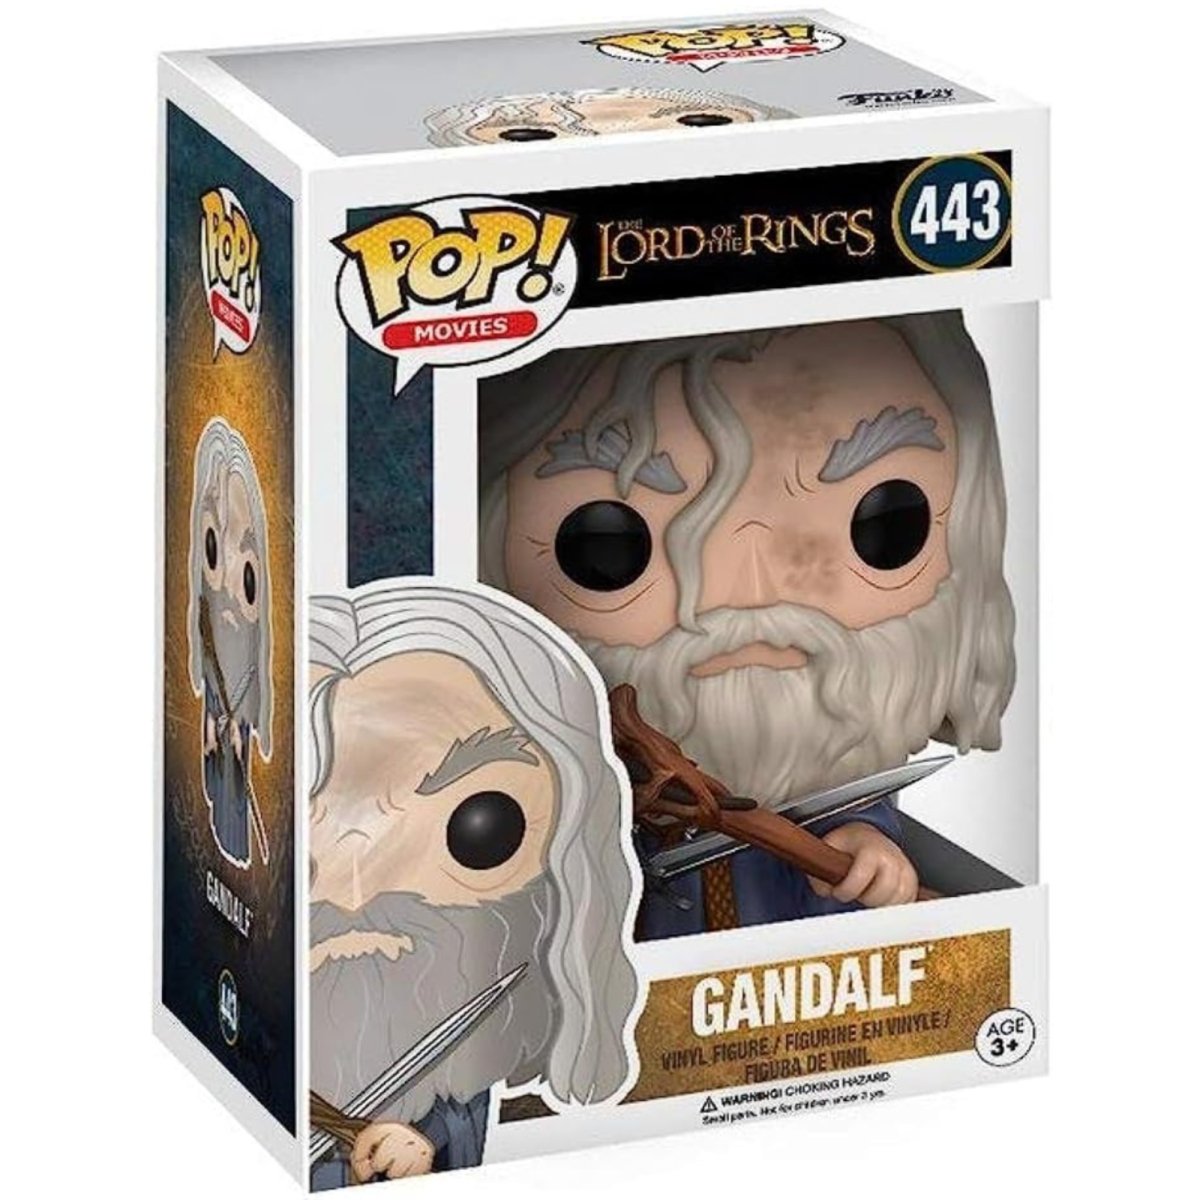 The Lord of the Rings - Gandalf #443 - Funko Pop! Vinyl Movies - Persona Toys